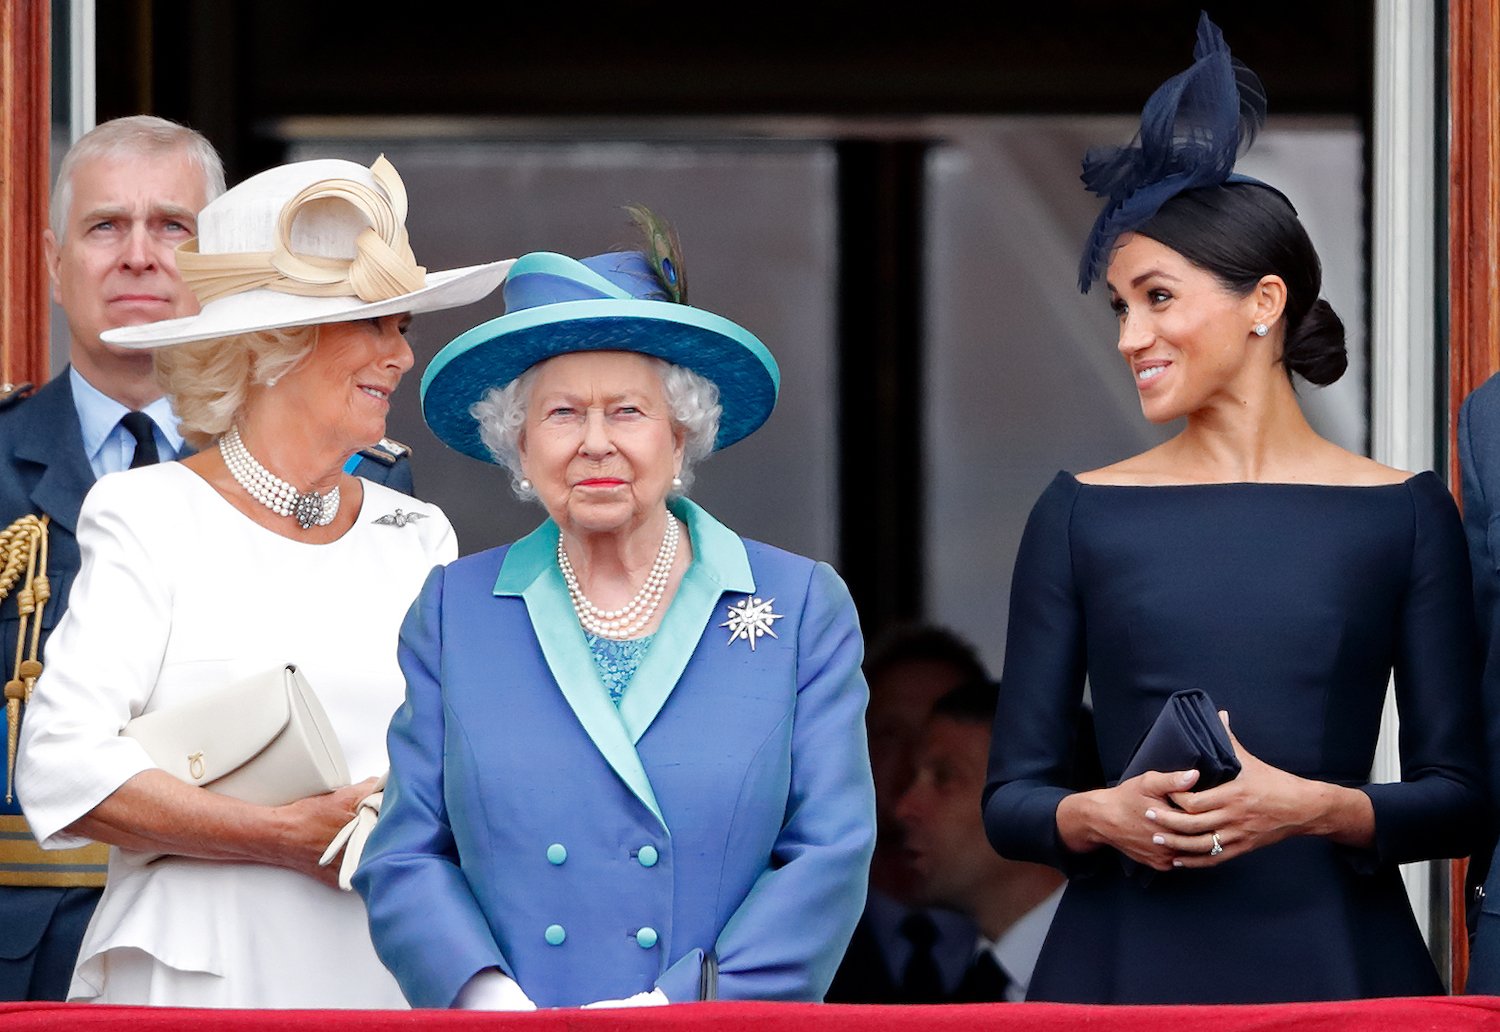 Camilla, Duchess of Cornwall, Queen Elizabeth II, and Meghan Markle watch a flypast to mark the centenary of the Royal Air Force from the balcony of Buckingham Palace